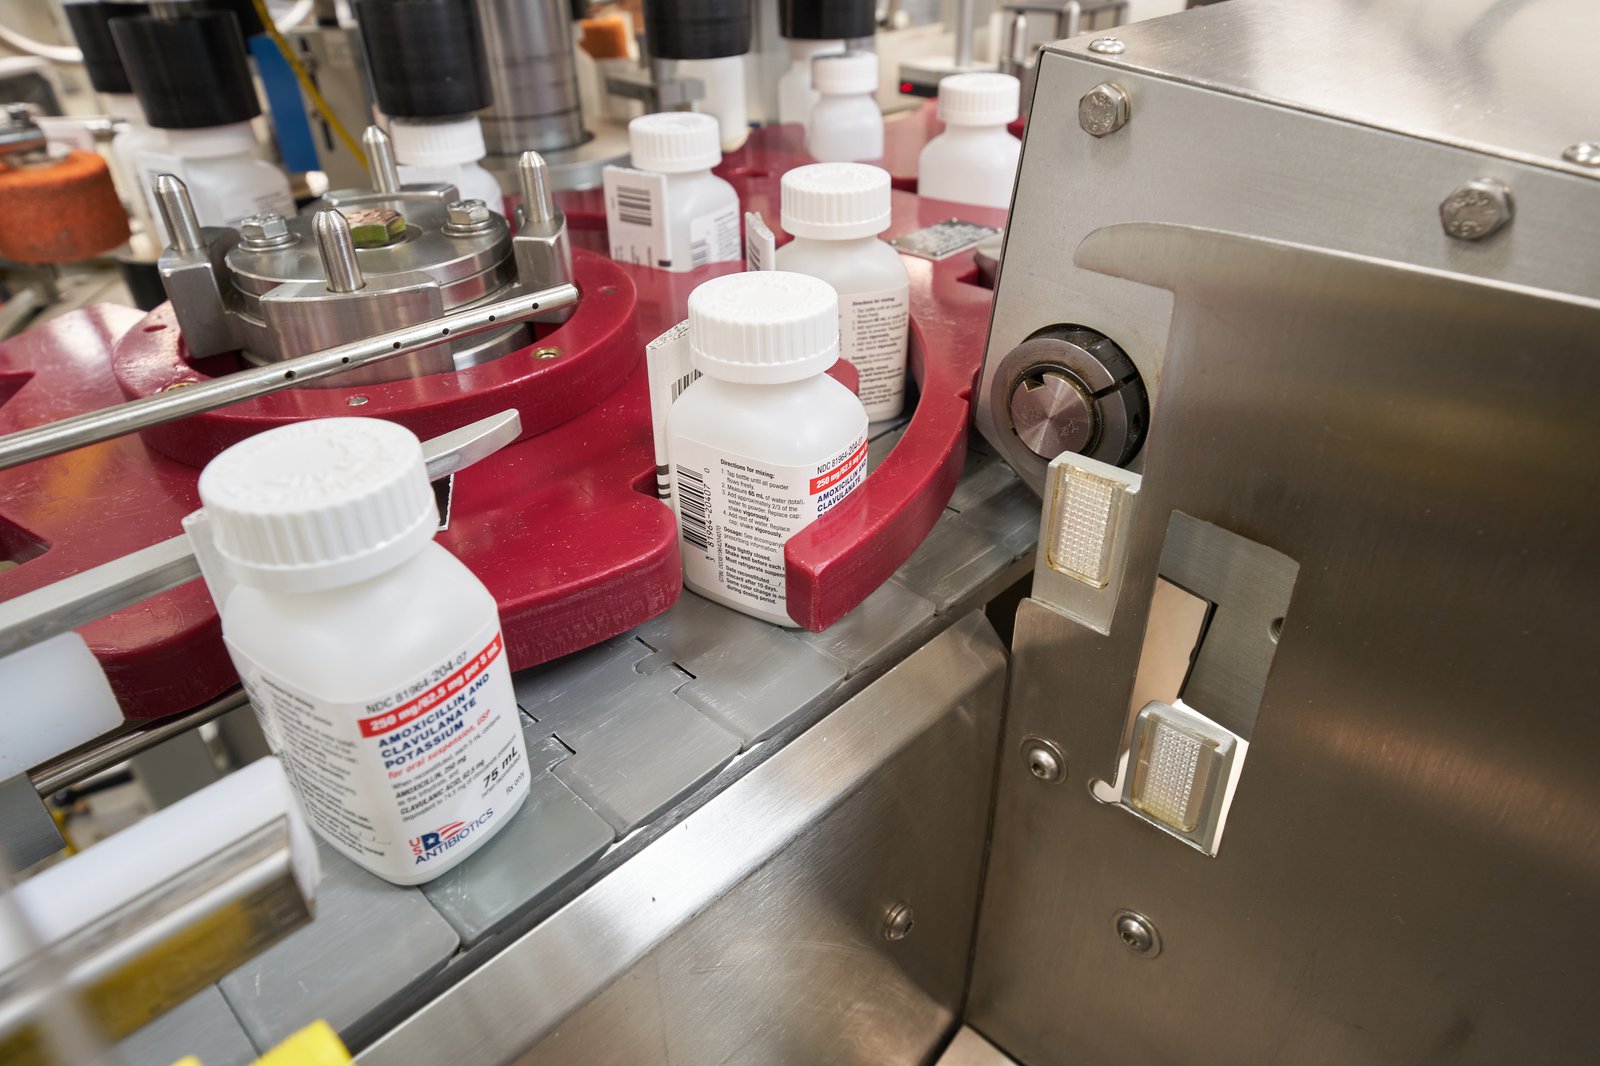 USAntibiotics Stands Ready to Assist in Critical Amoxicillin Shortage